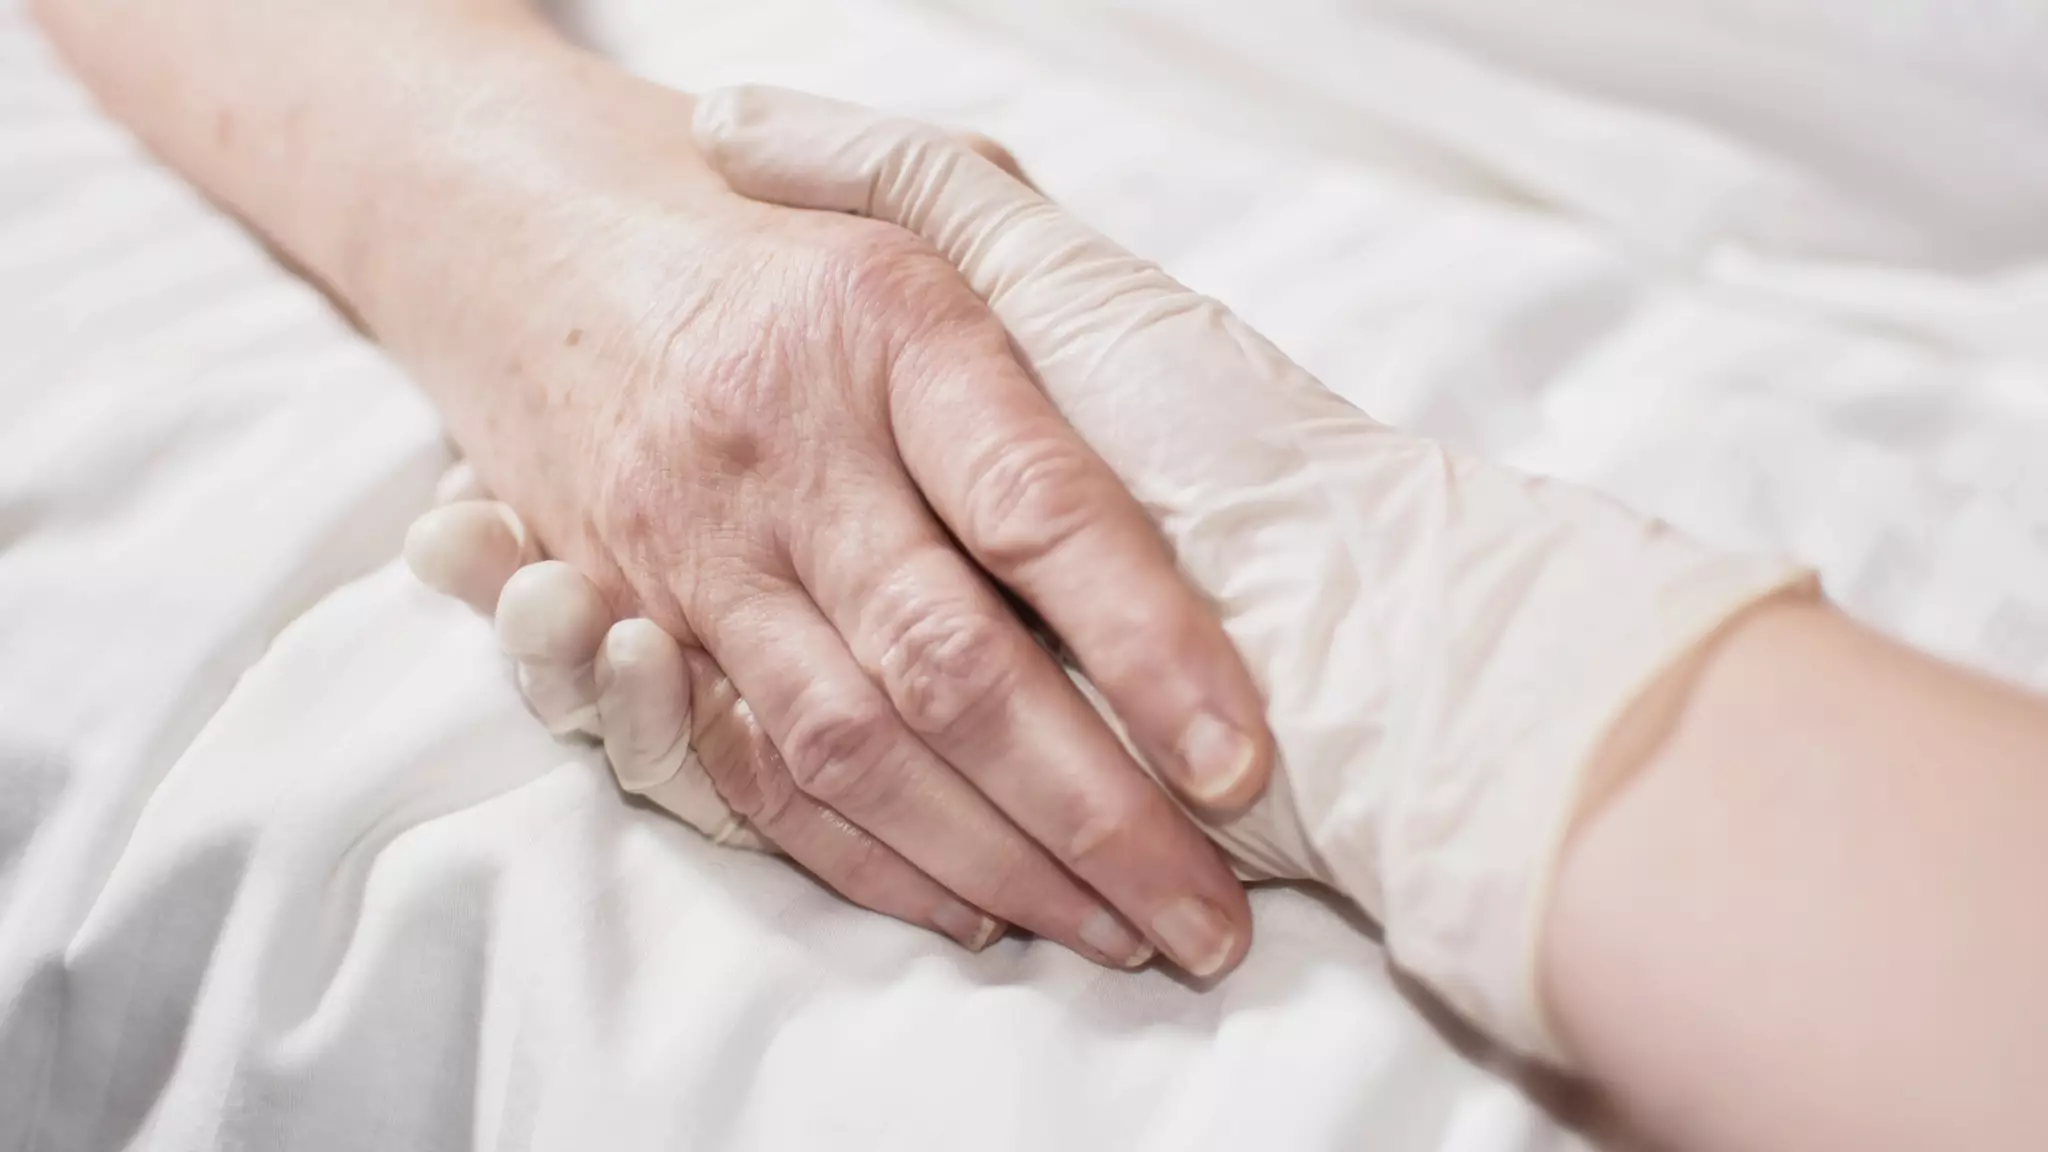 Euthanasia Bill Finally Passes In South Australia After 17th Attempt And 26 Years